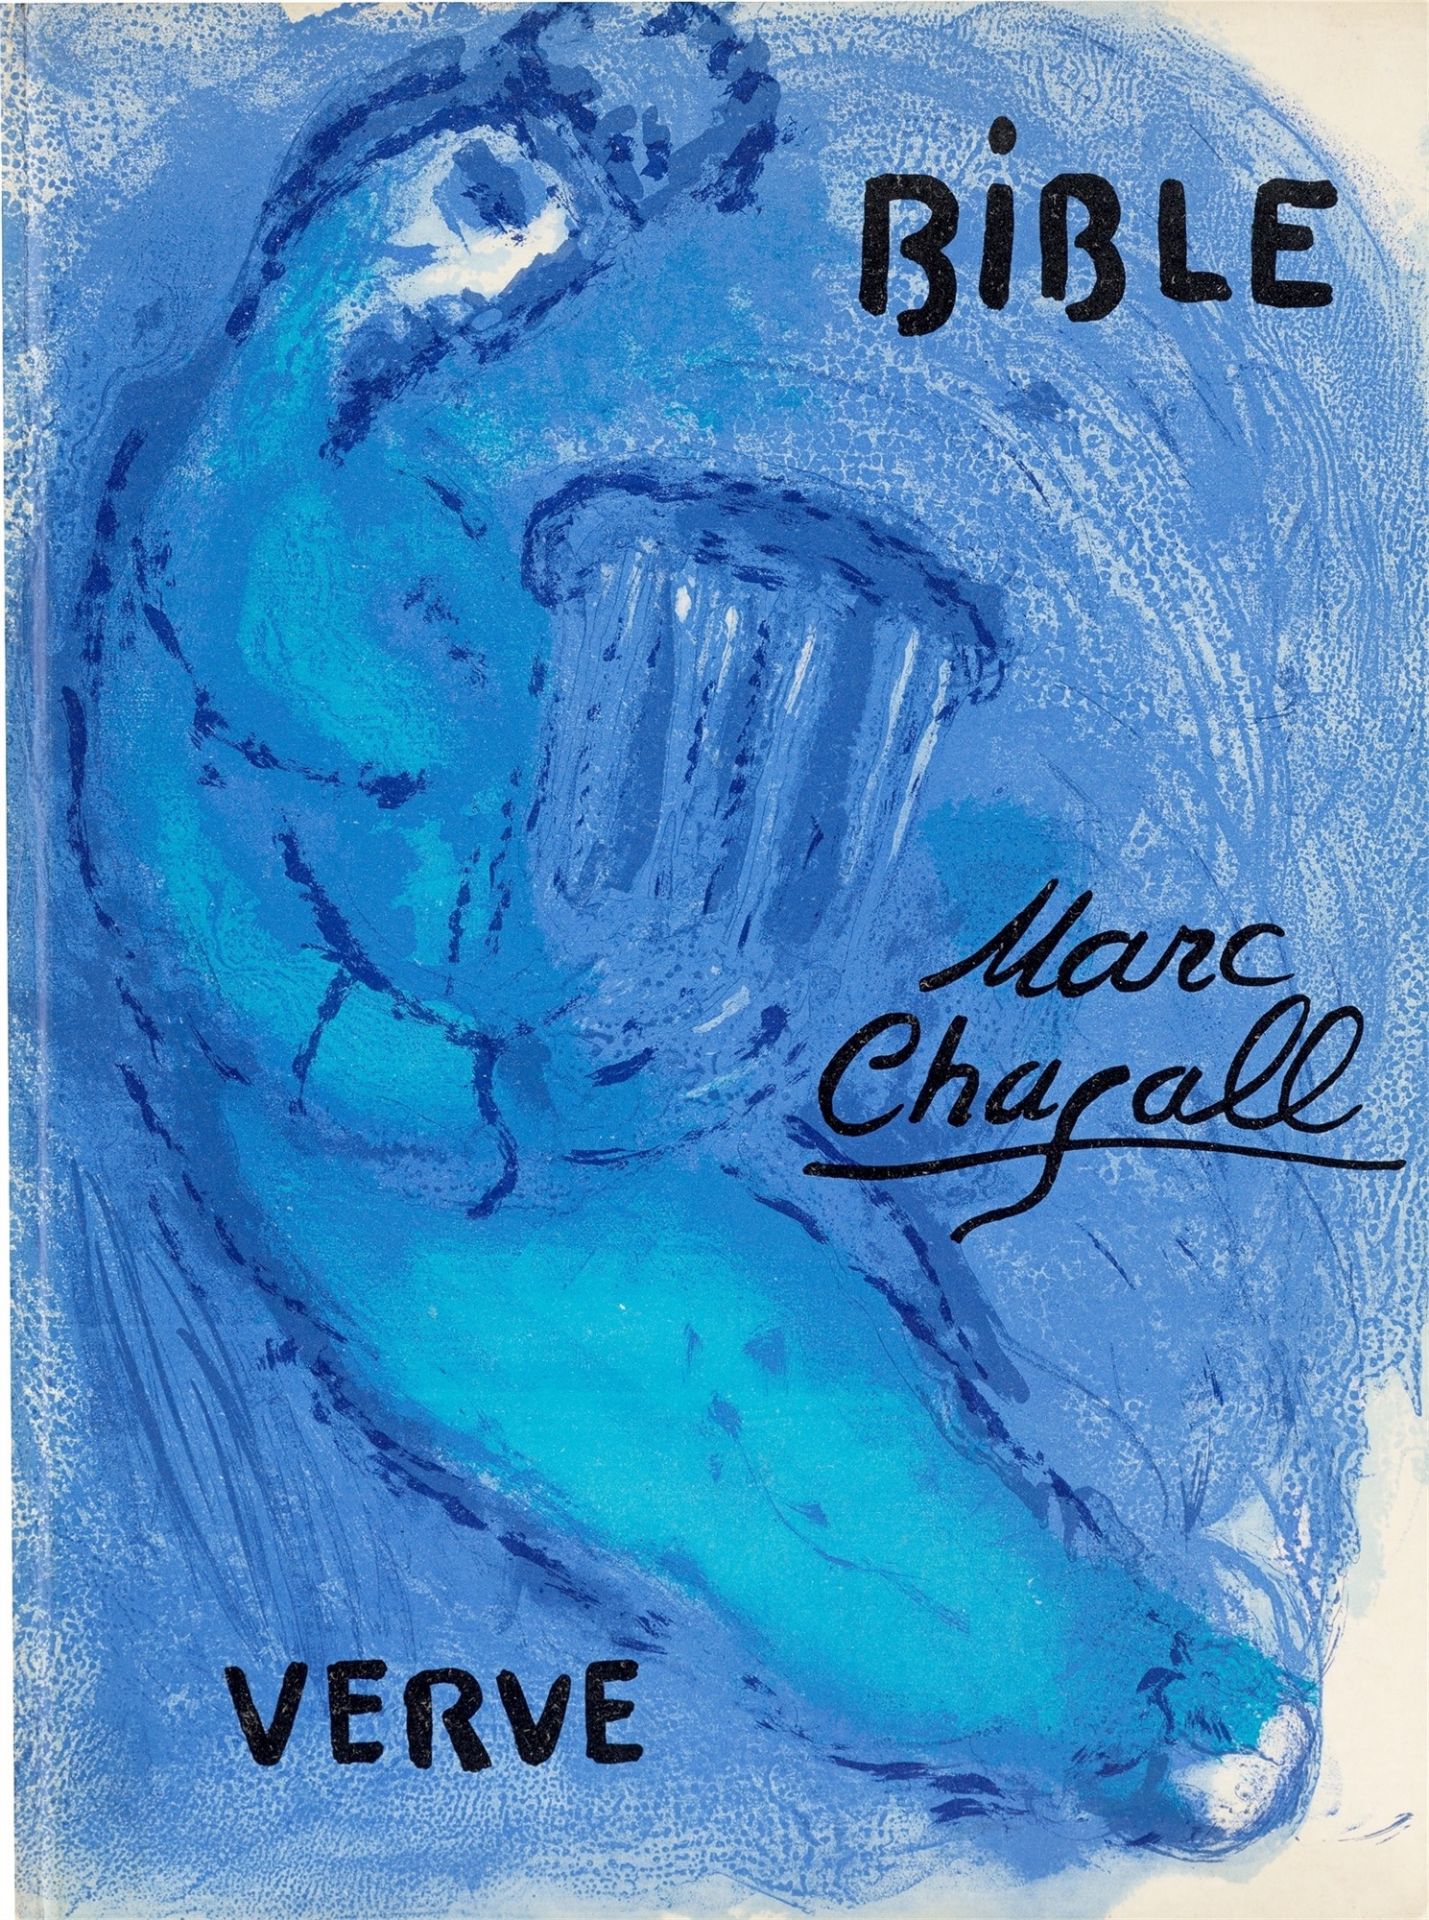 Marc Chagall. „Bible“. 1956